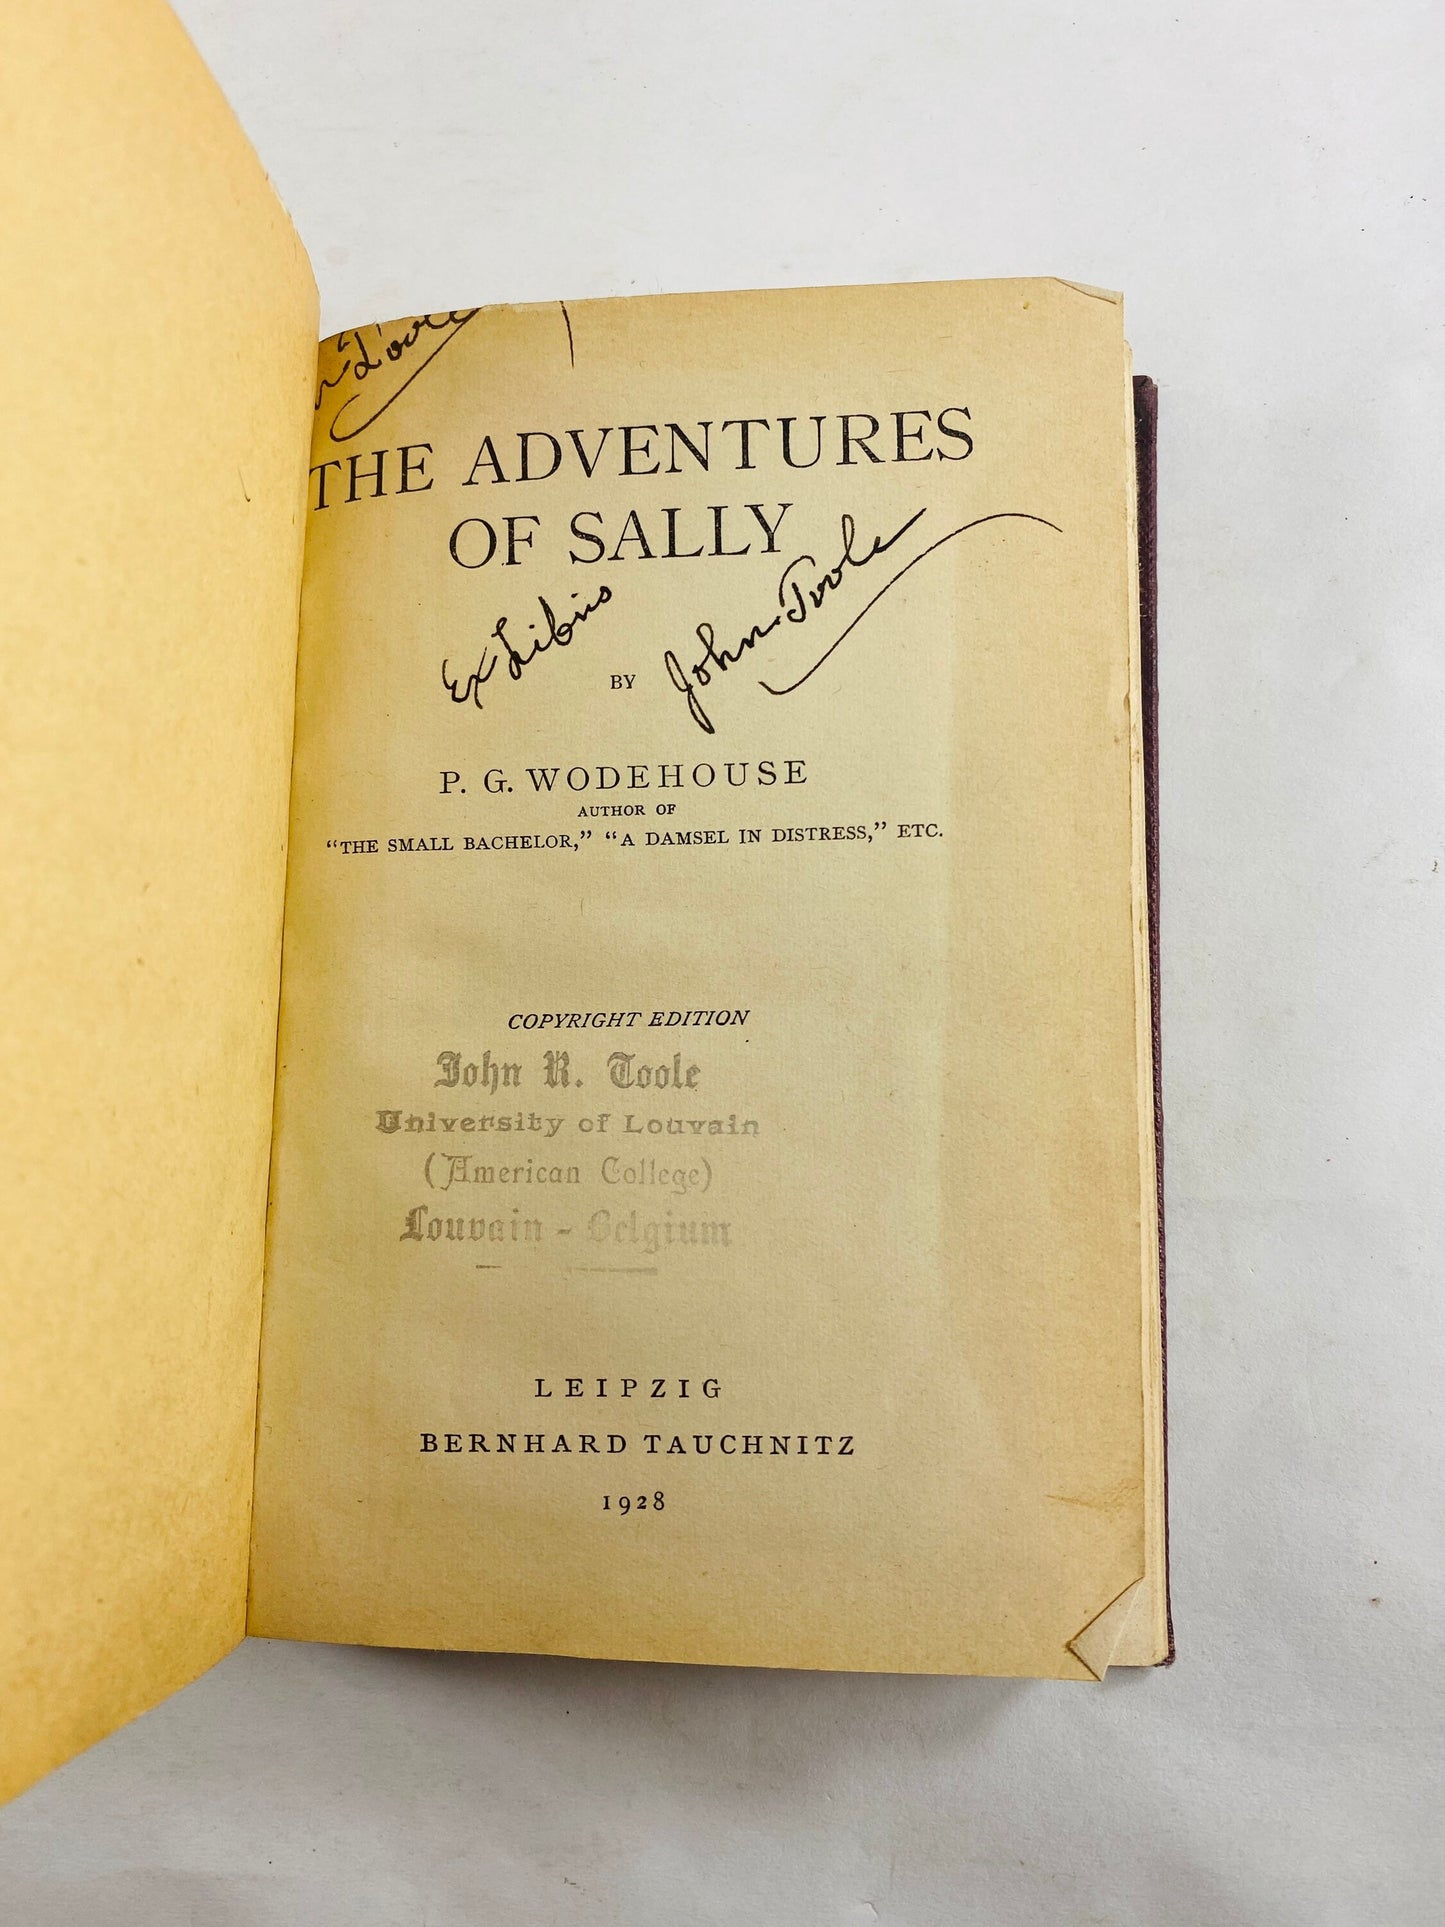 1926 Adventures of Sally by PG Wodehouse vintage book about a taxi dancer who inherits a considerable fortune Small red Tauchnitz antique